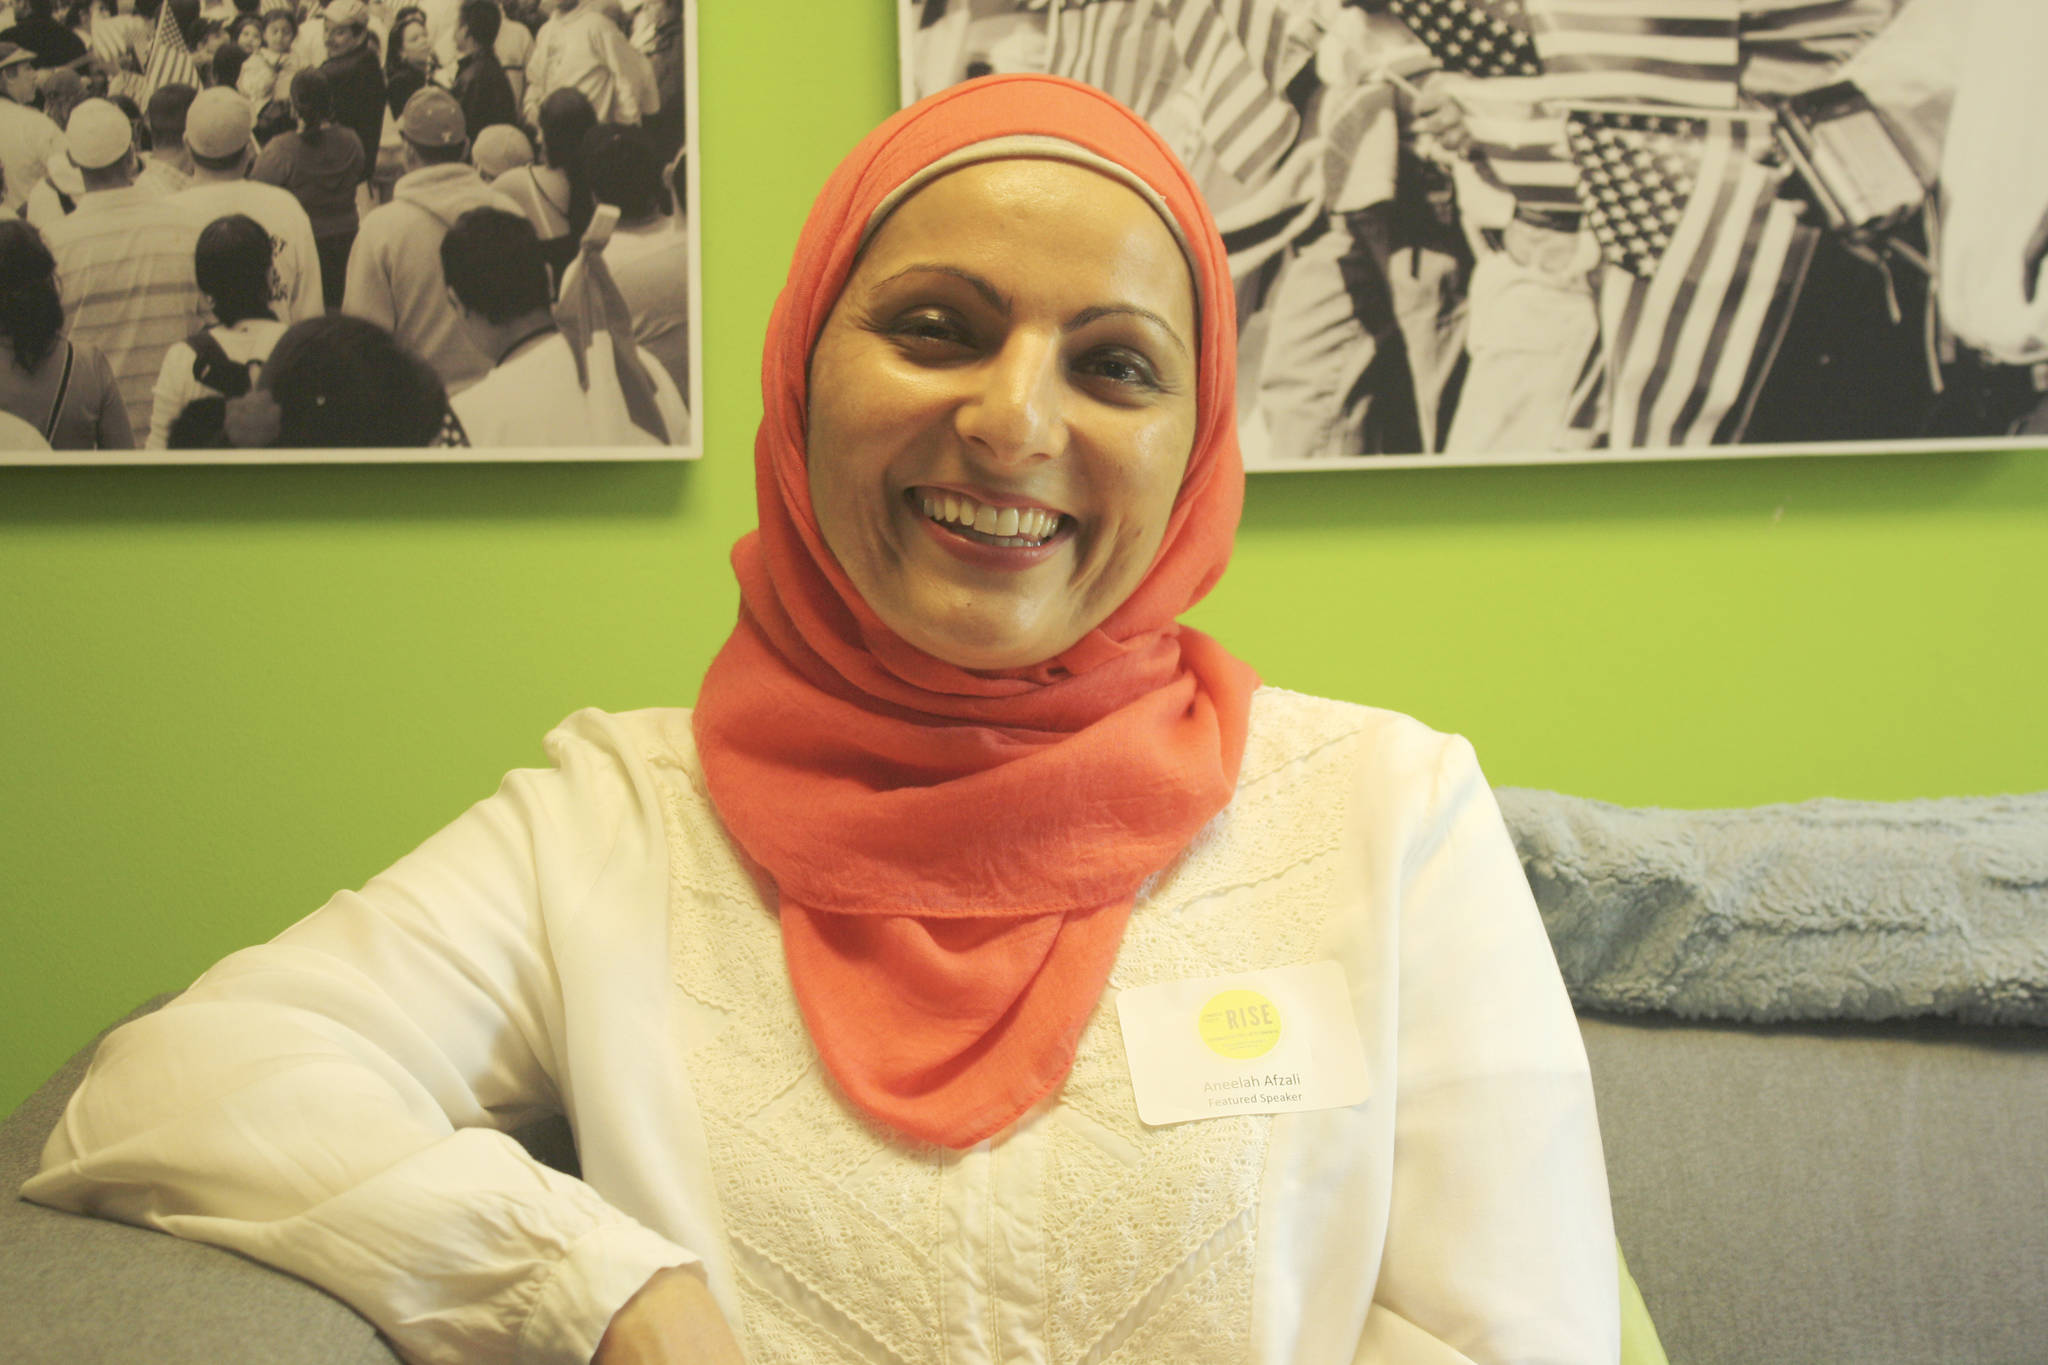 Aneelah Afzali, executive director of American Muslim Empowerment Network, was the featured speaker at 21 Progress’s Rise #7 event. Photo by Melissa Hellmann